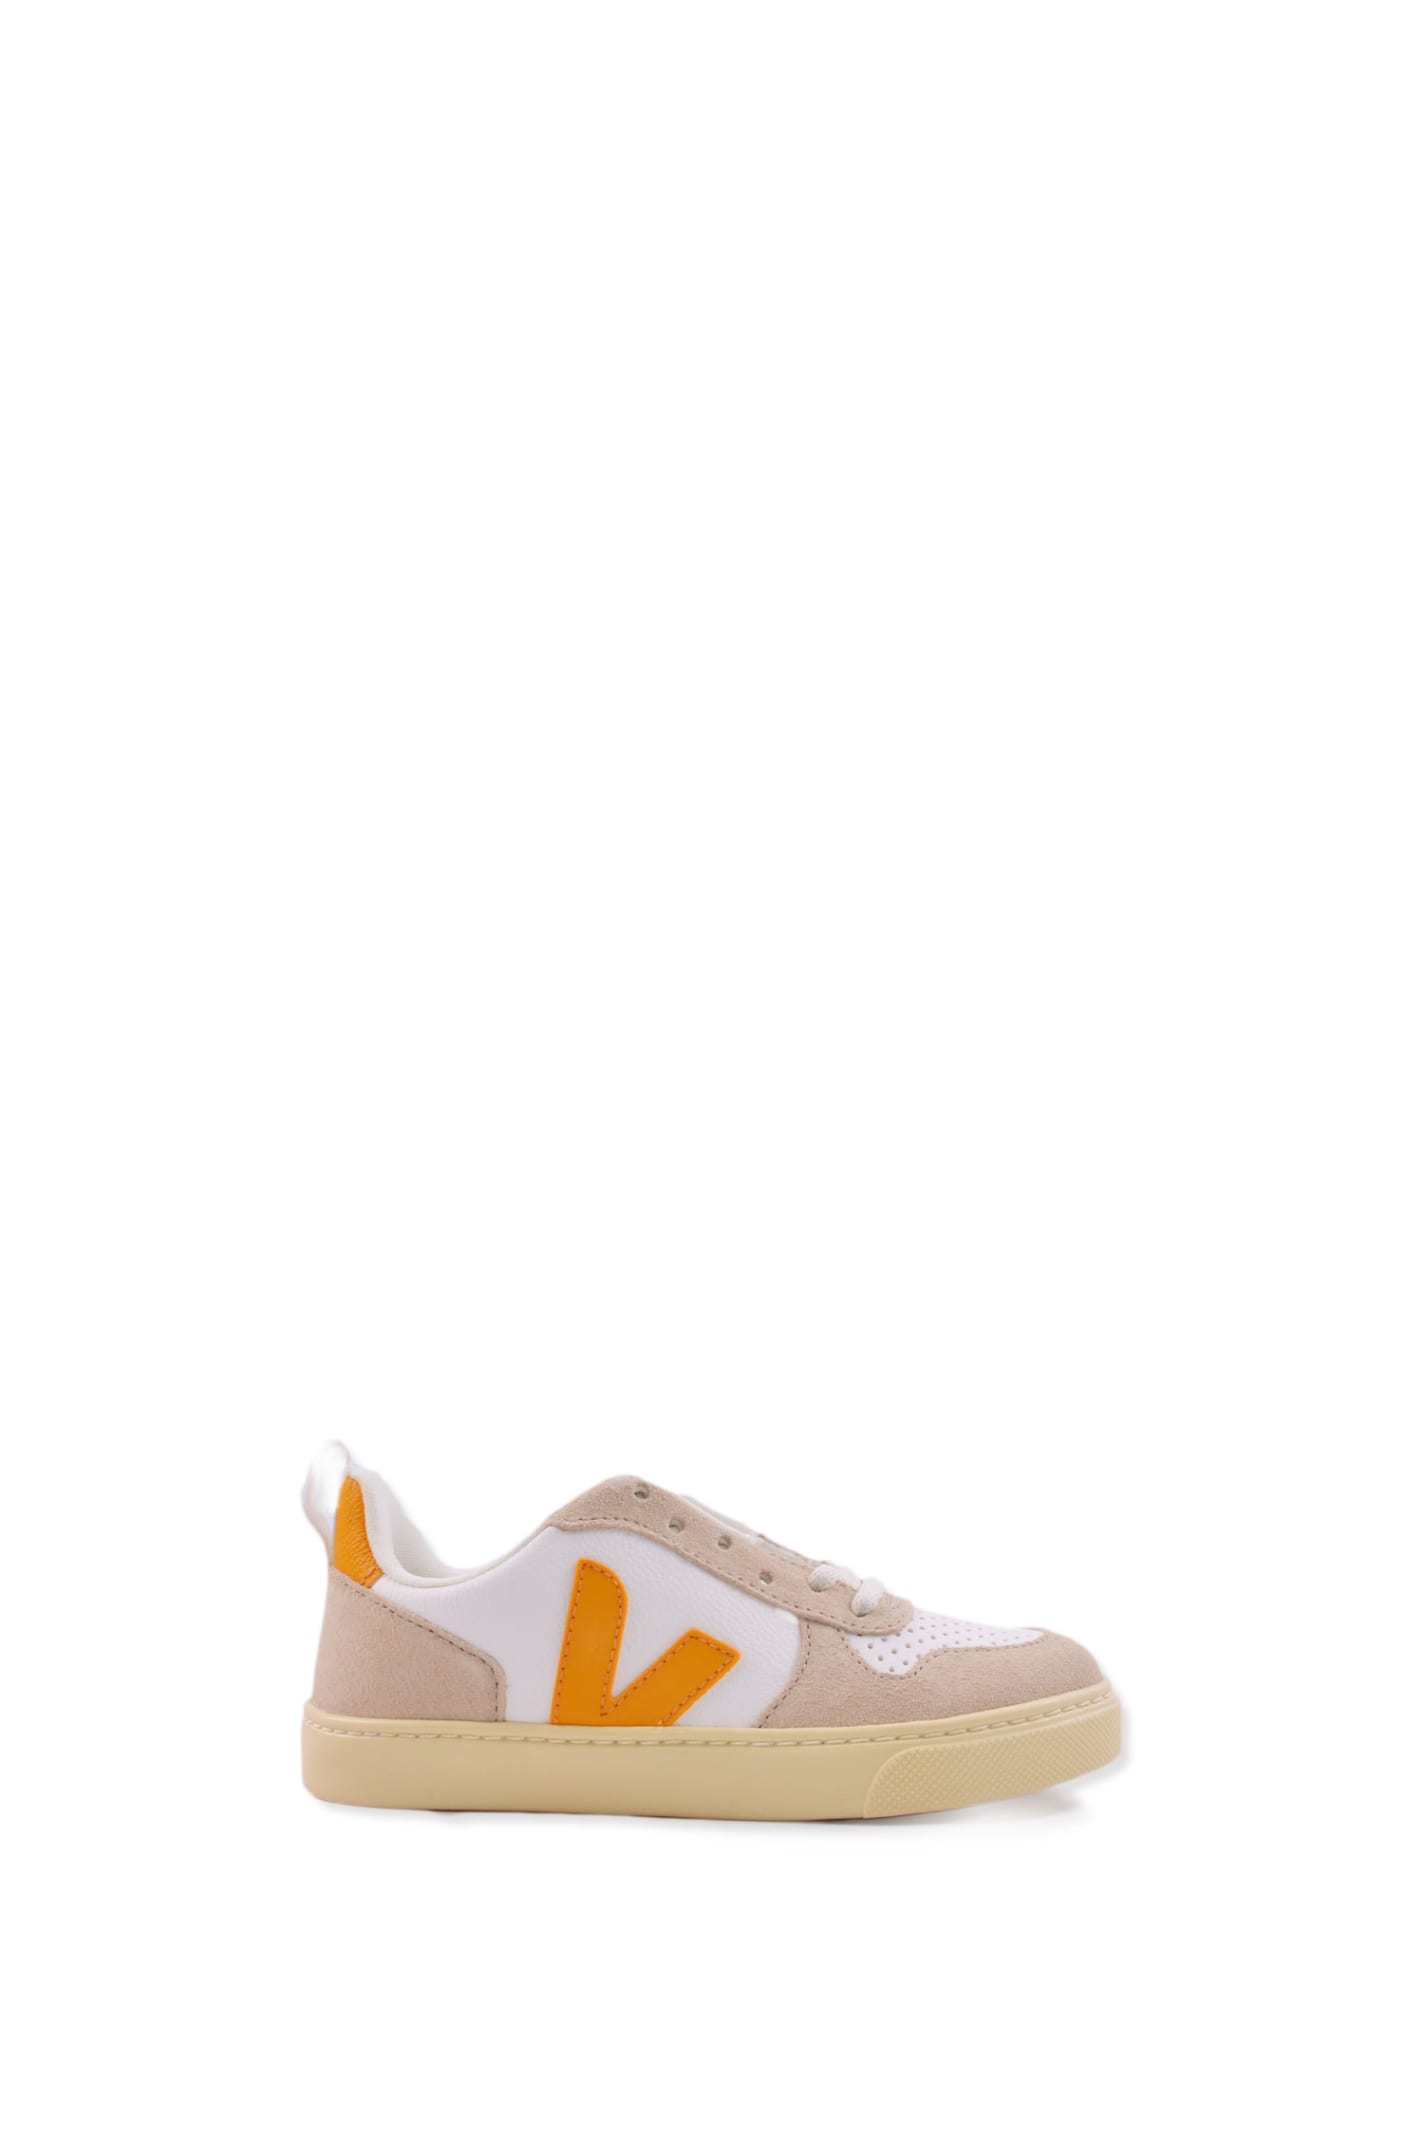 Veja Kids' Leather Sneakers In Yellow